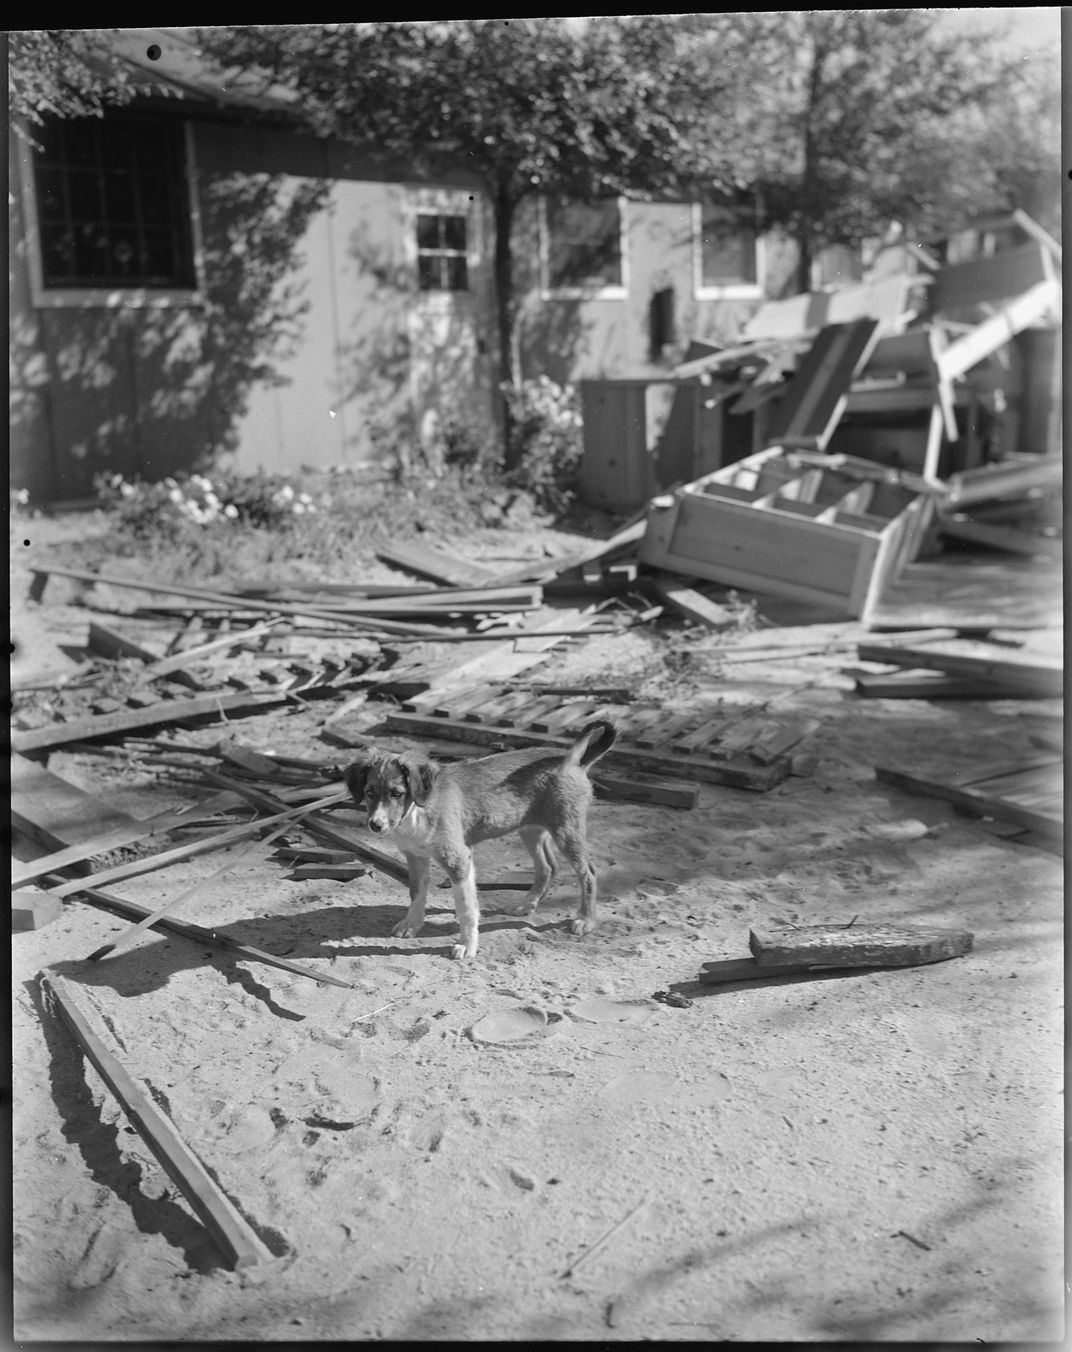 A black and white photo shows a medium size dog standing on a pile of scrap lumber